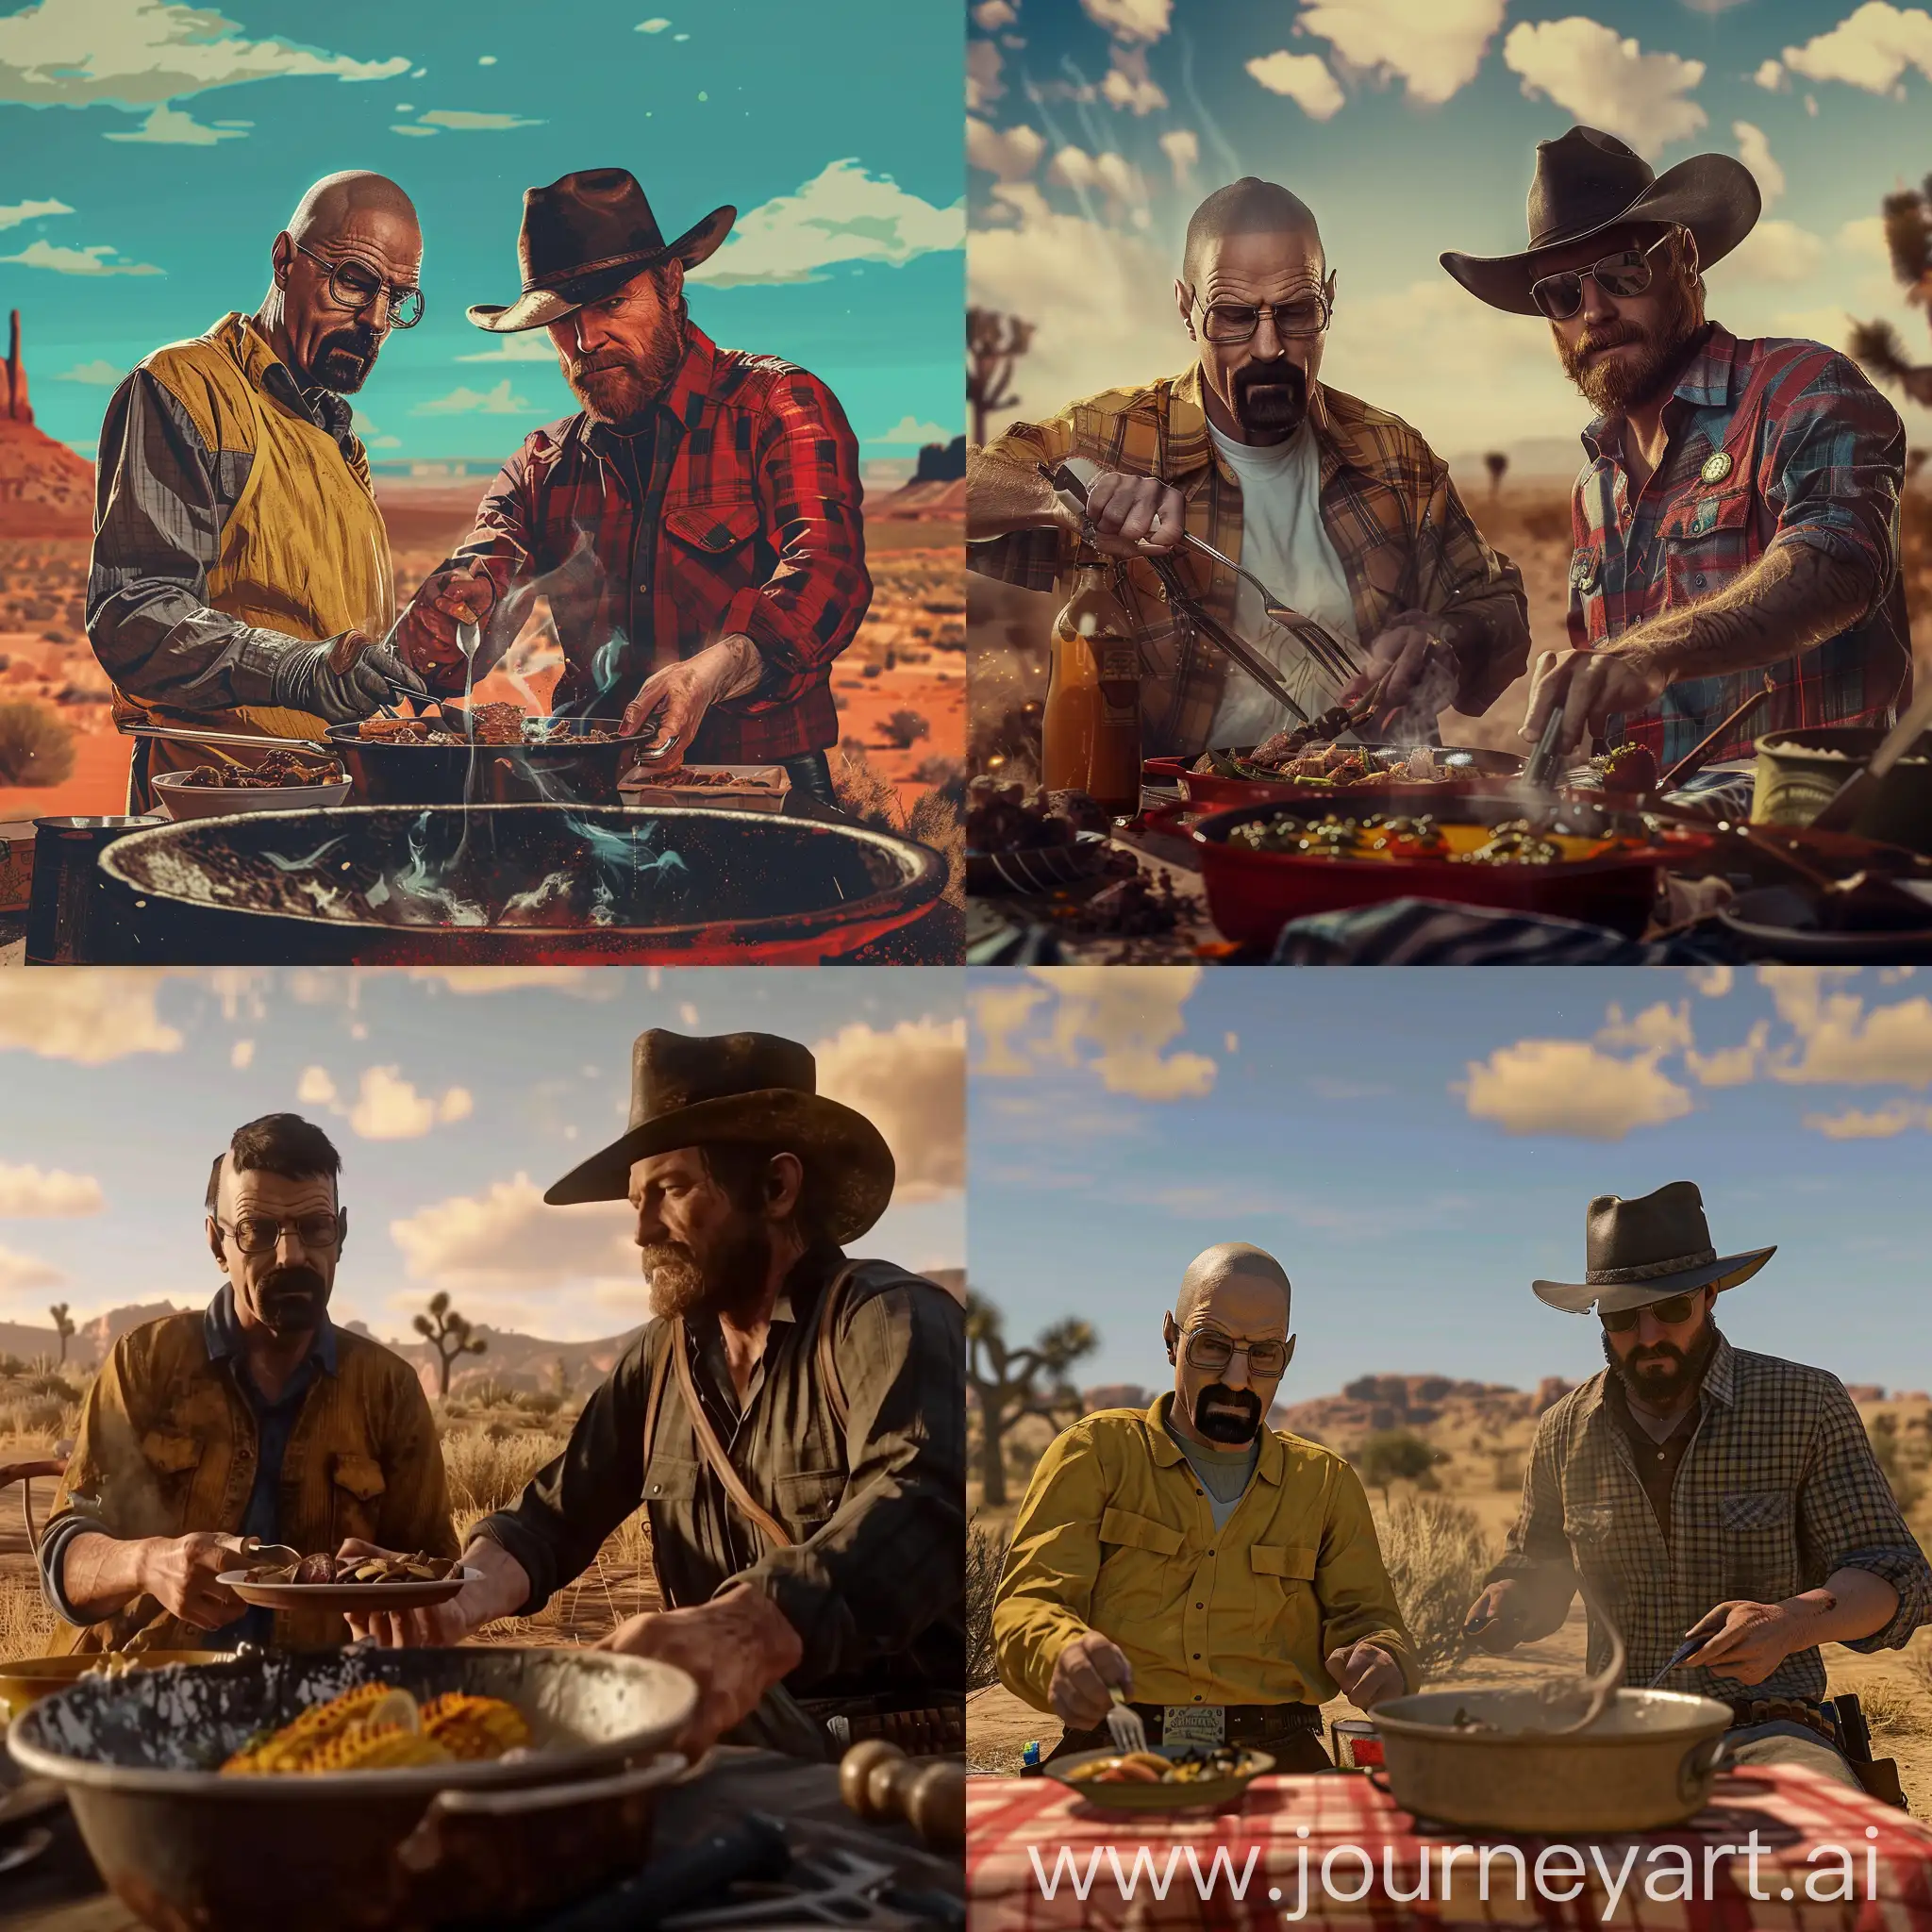 Walter White from Breaking Bad and Arthur Morgan from Red dead Redemption 2 cook dinner together in the desert